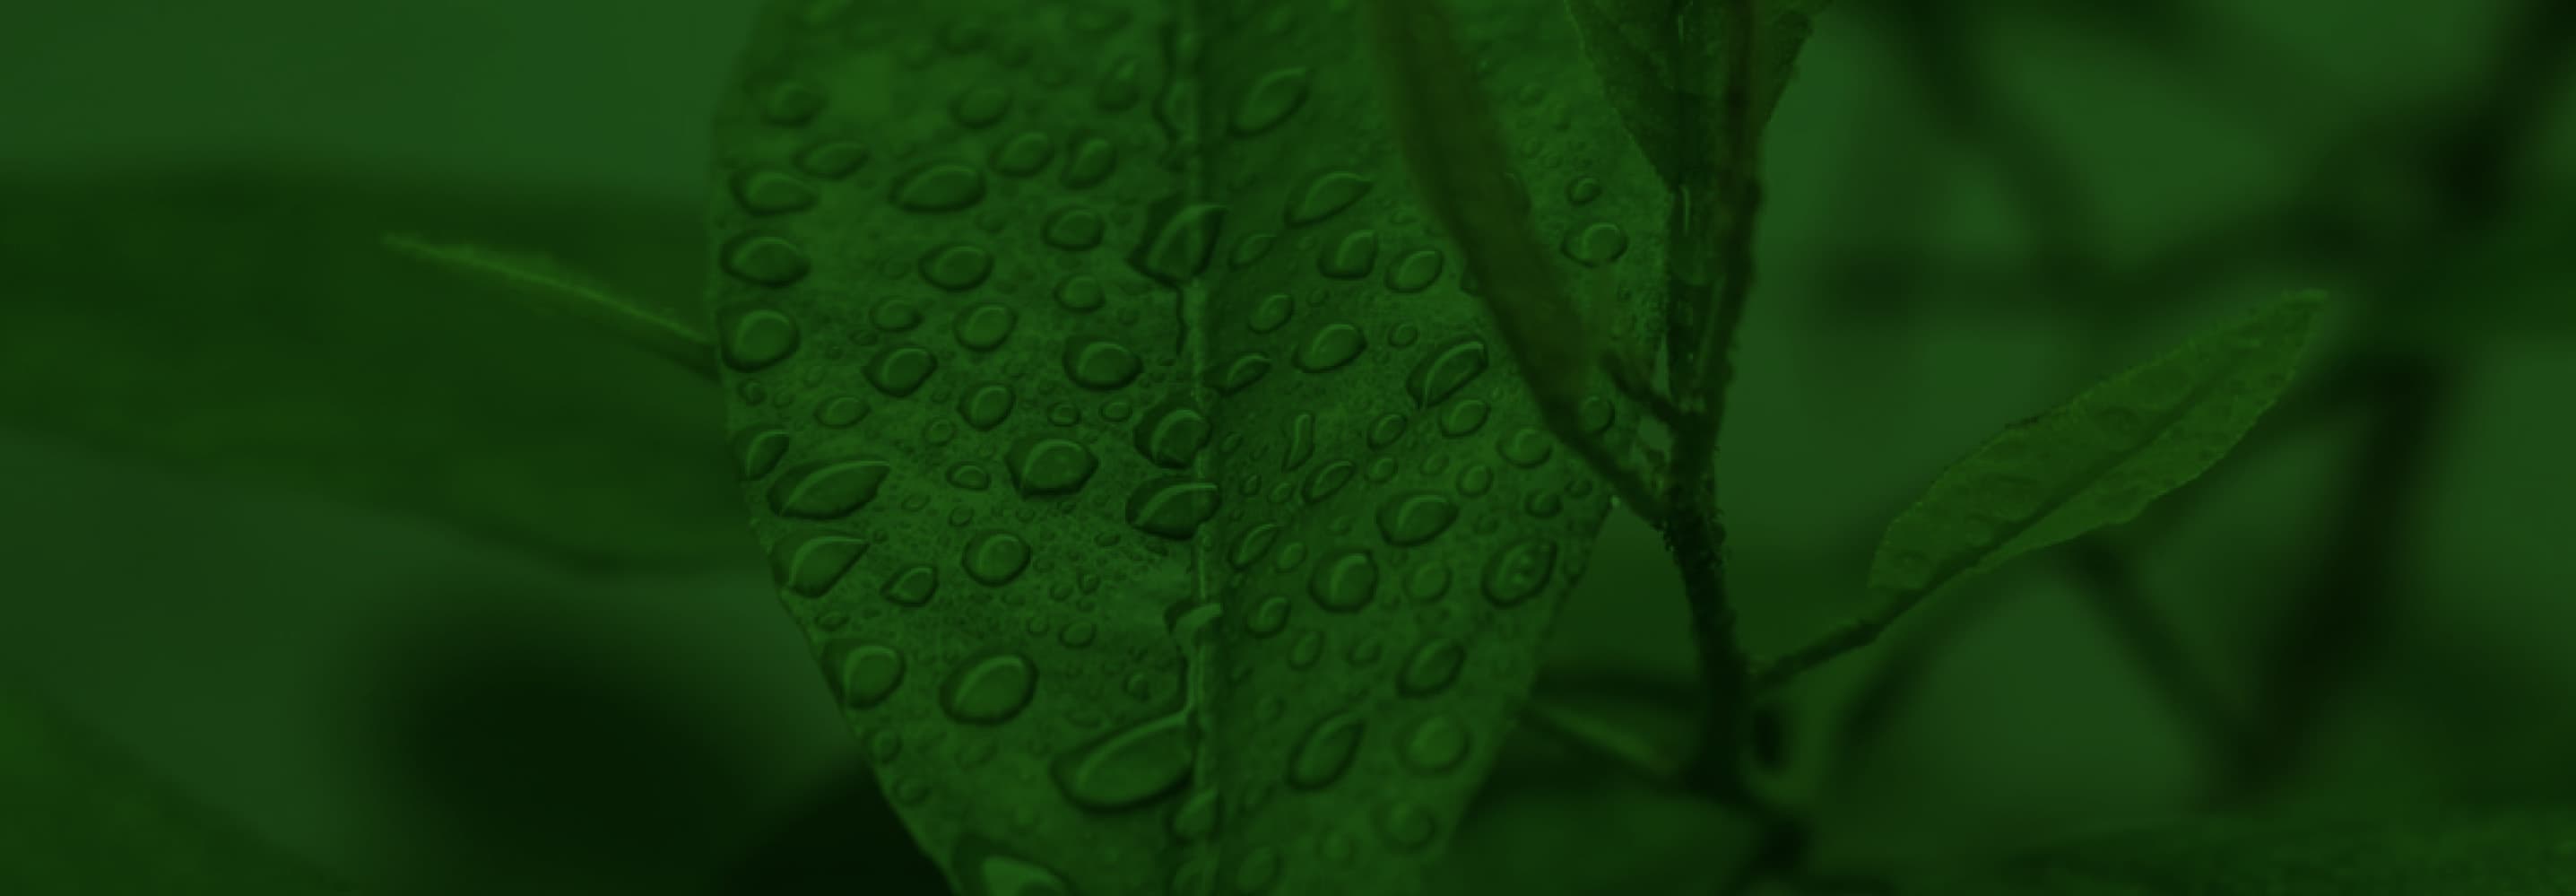 A green plant with leaves covered in water droplets.